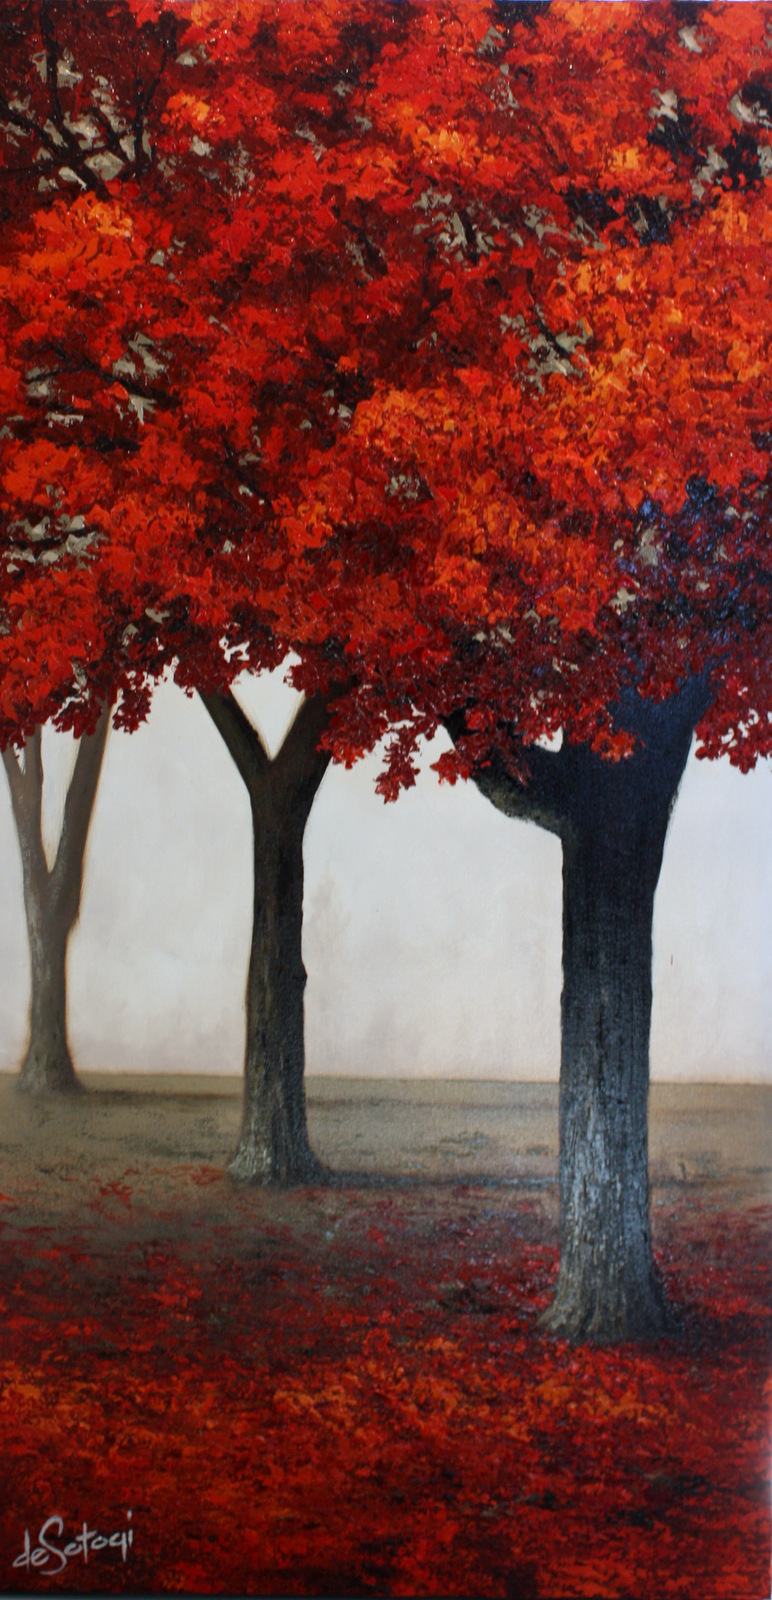 Dave Sotogi, "Scarlet Shadows" (Red Trees), Oil on Canvas, 1220 x 610mm, 2015